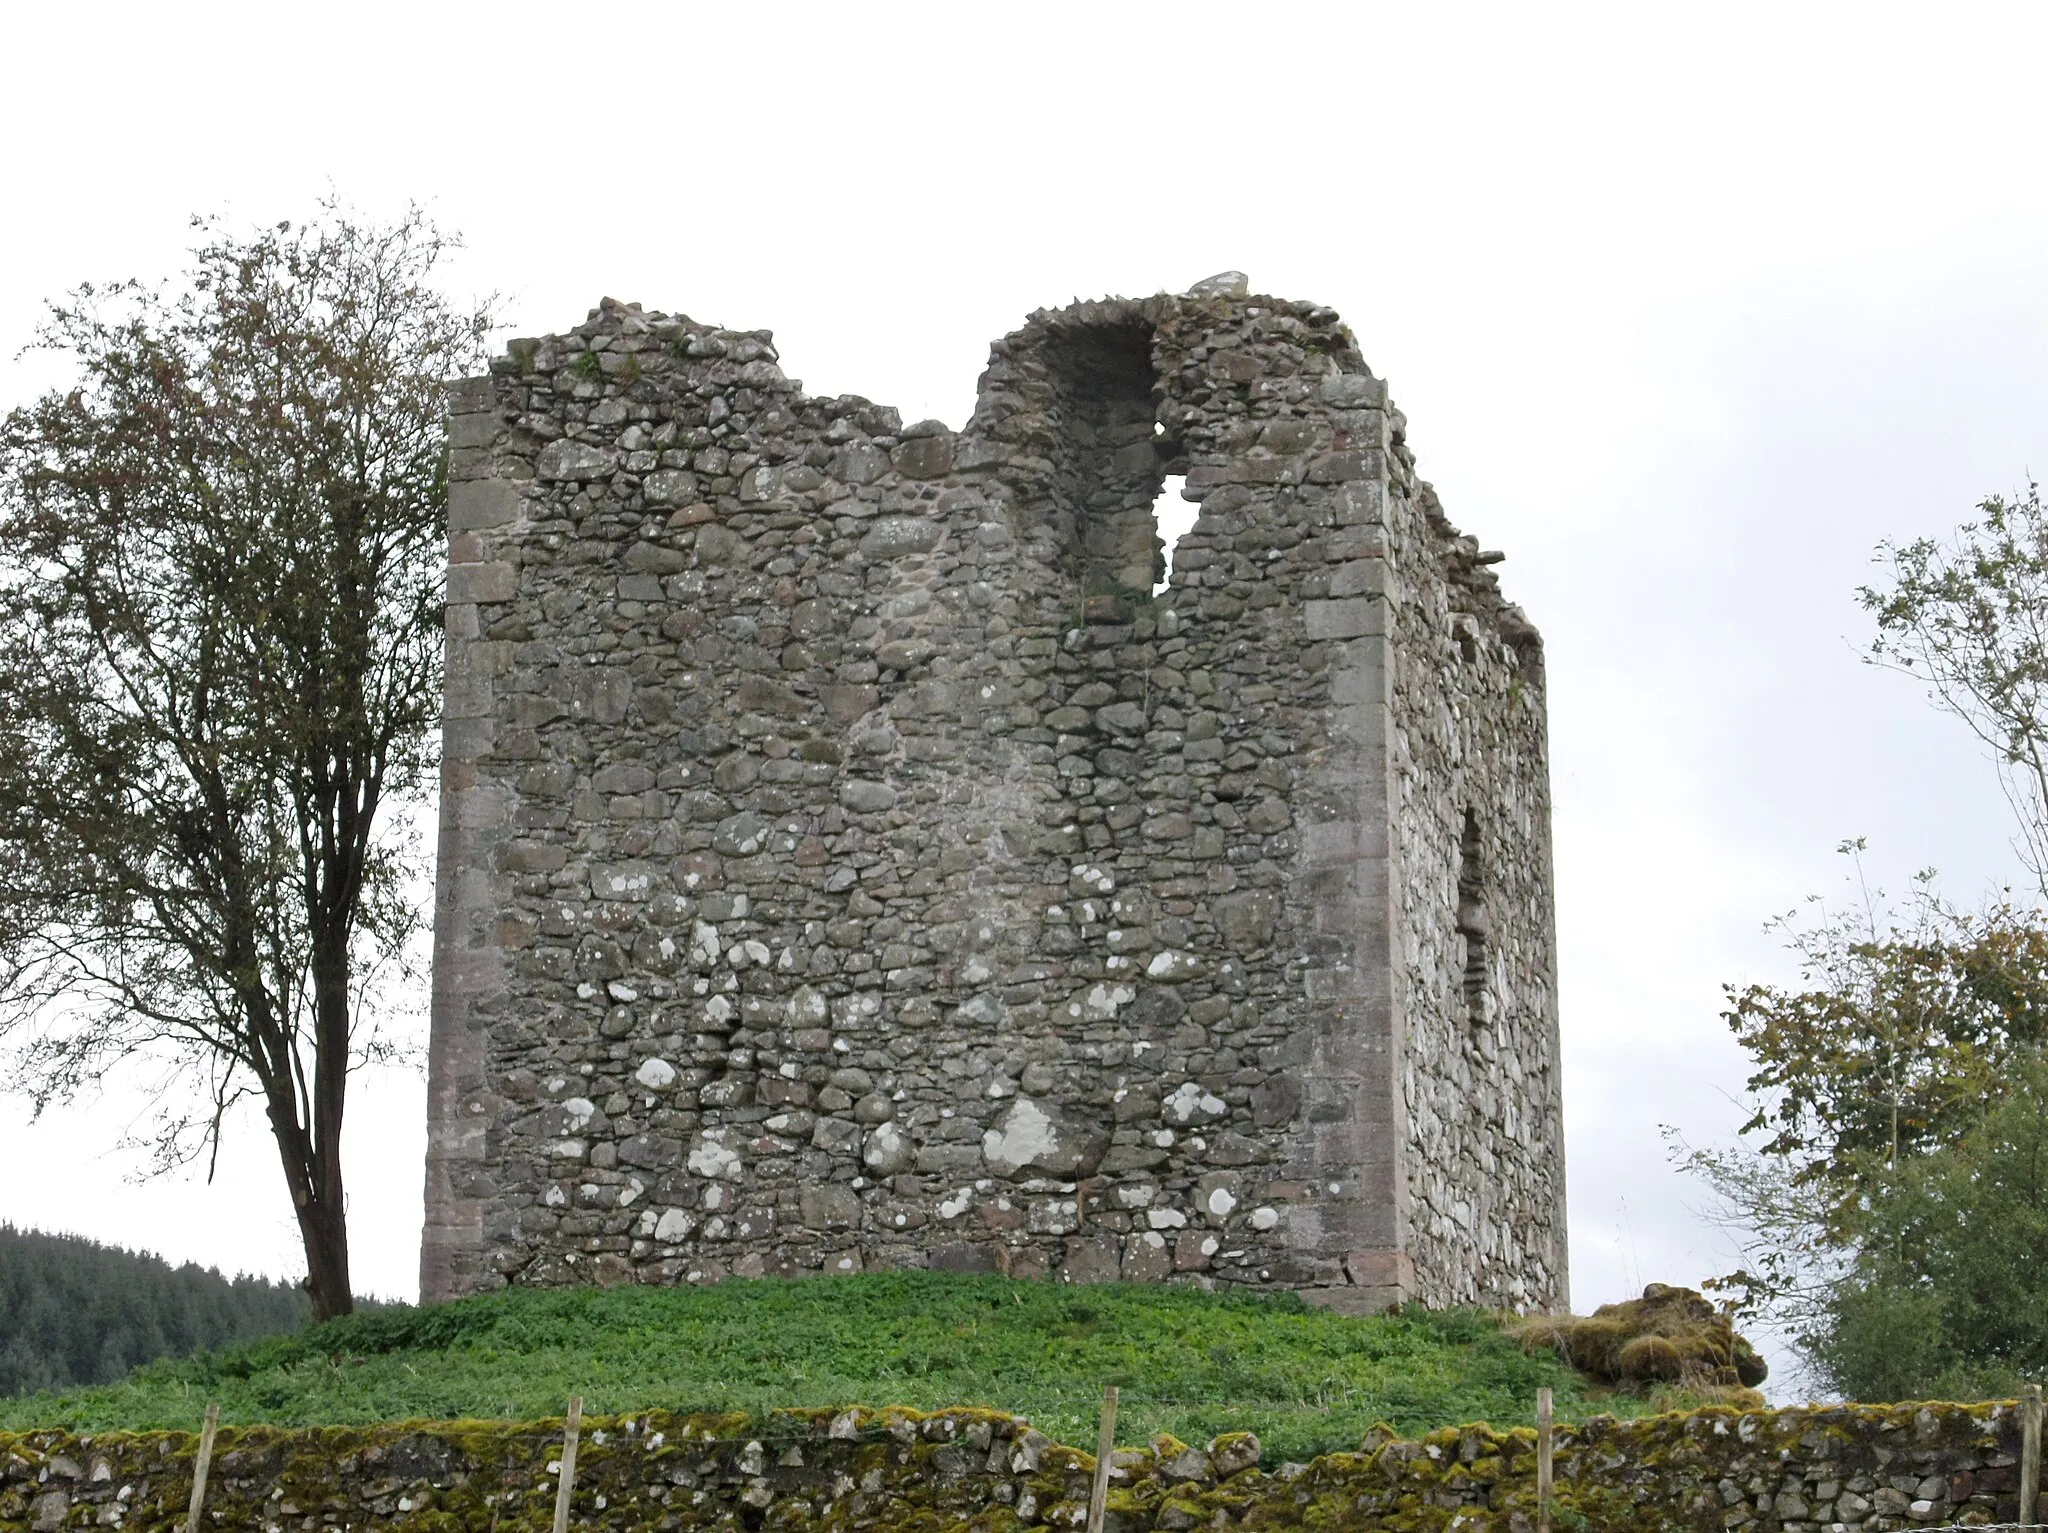 Photo showing: Lag Tower from the north-west showing the garde-robe position and the absence of the third storey, Dunscore, Dumfries & Galloway, Scotland. Ancestral home of the Grierson Clan.